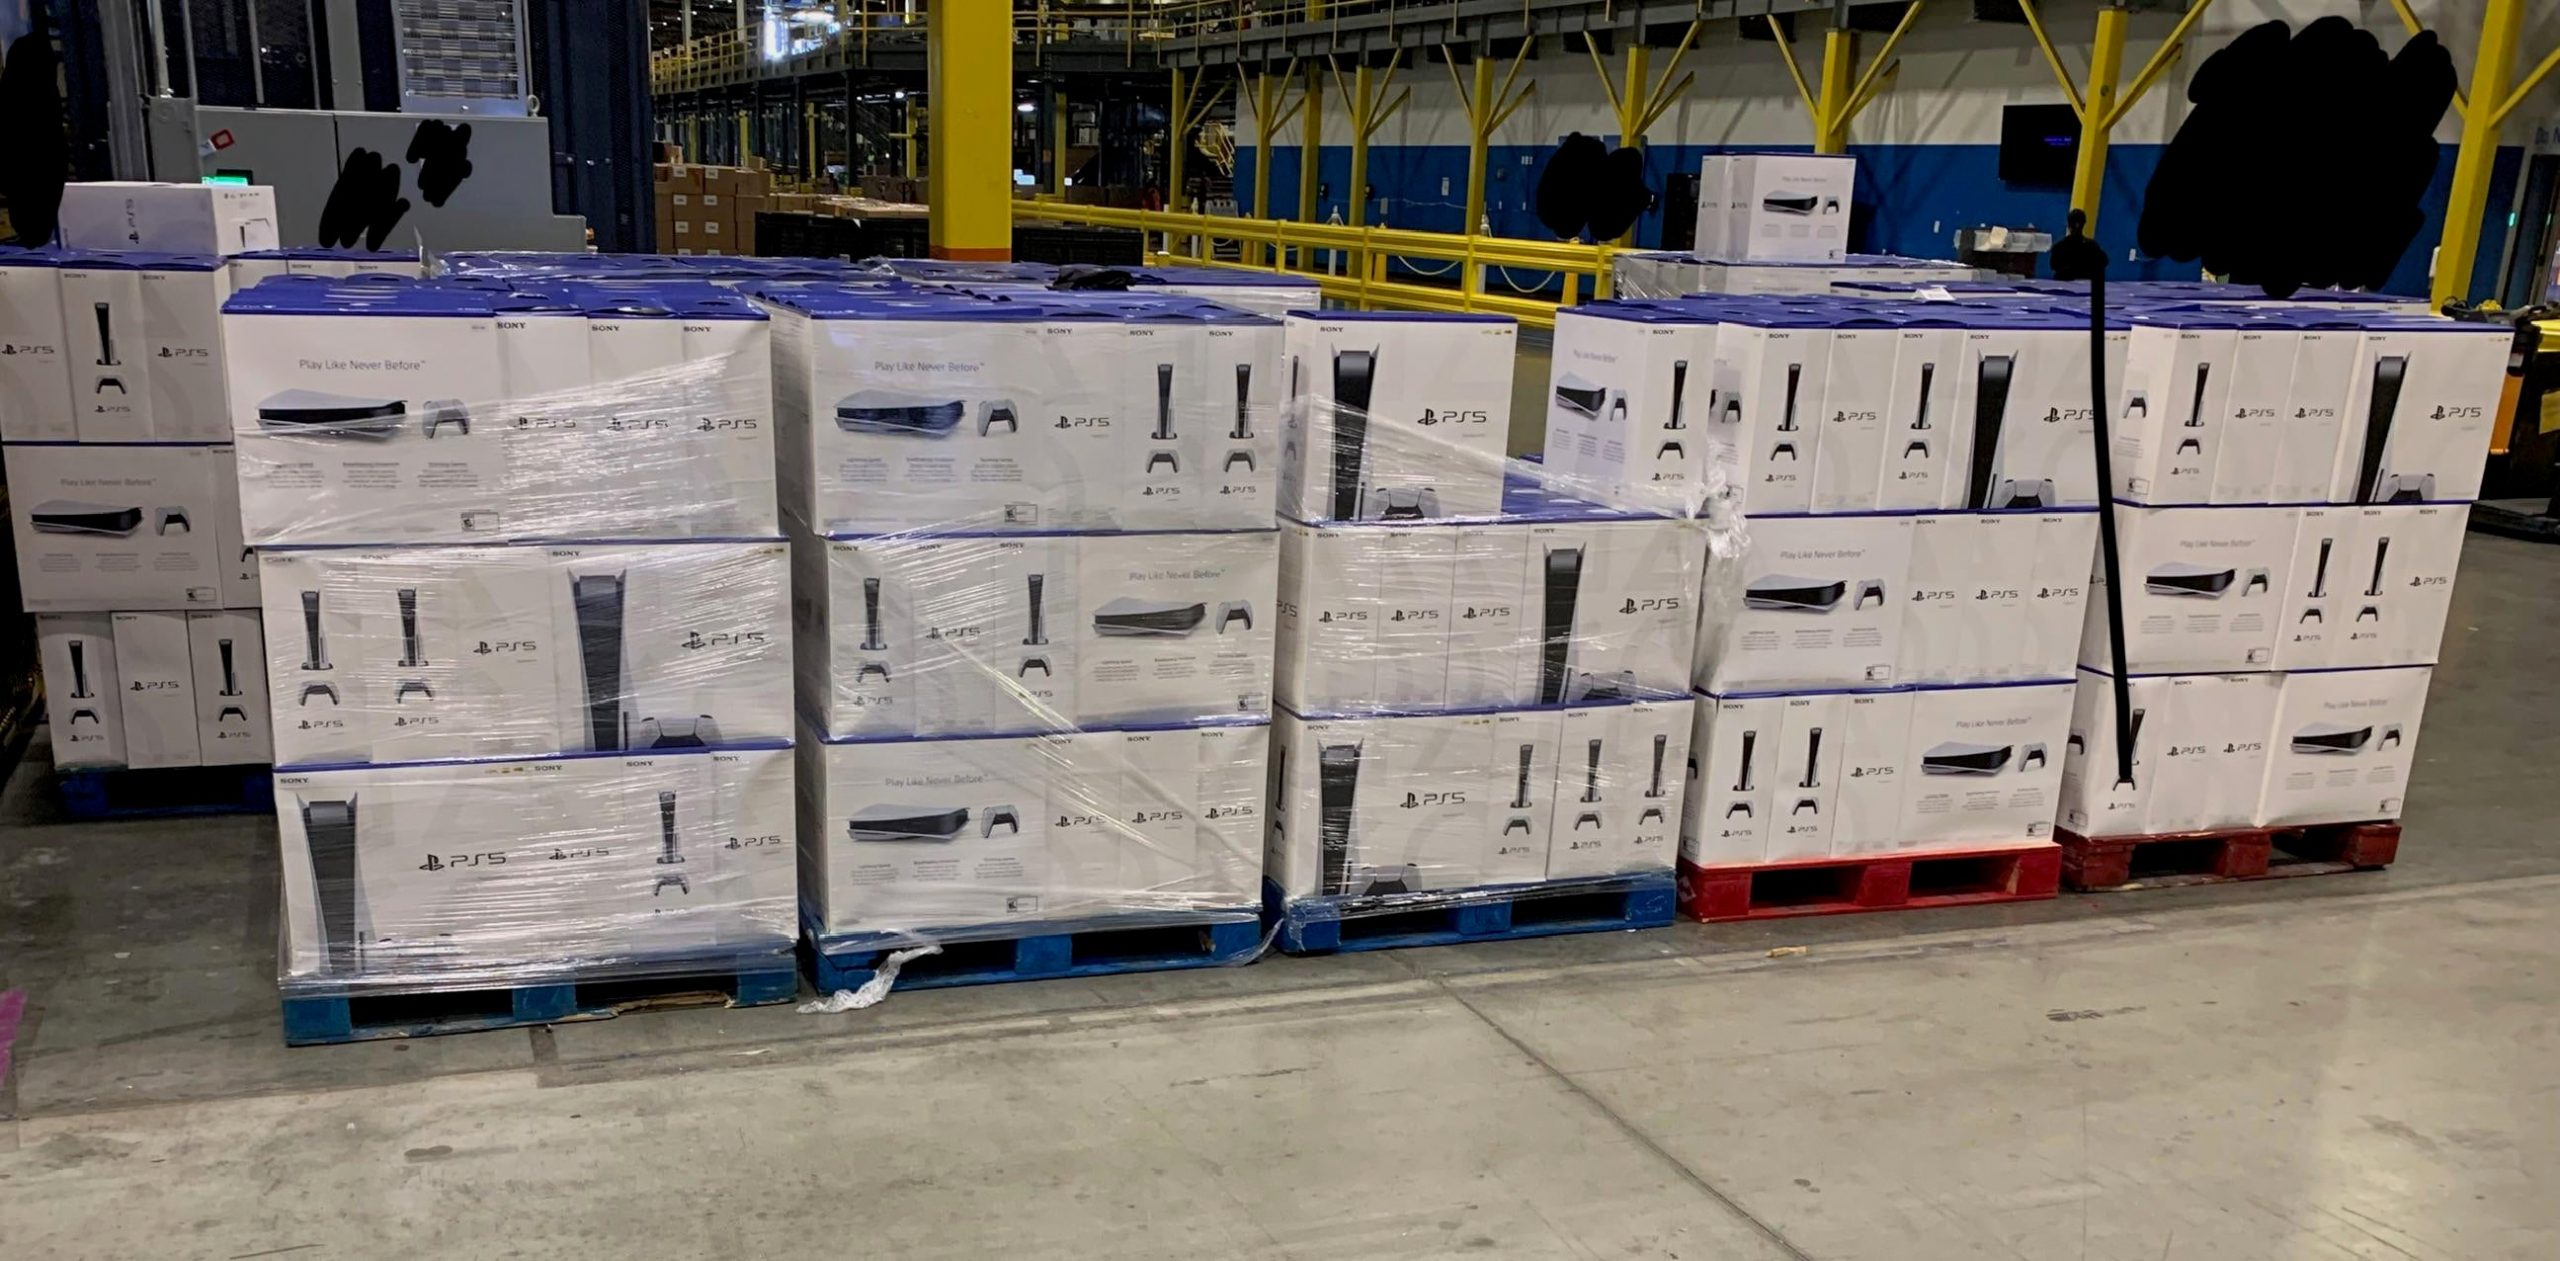 PS5 consoles in warehouse